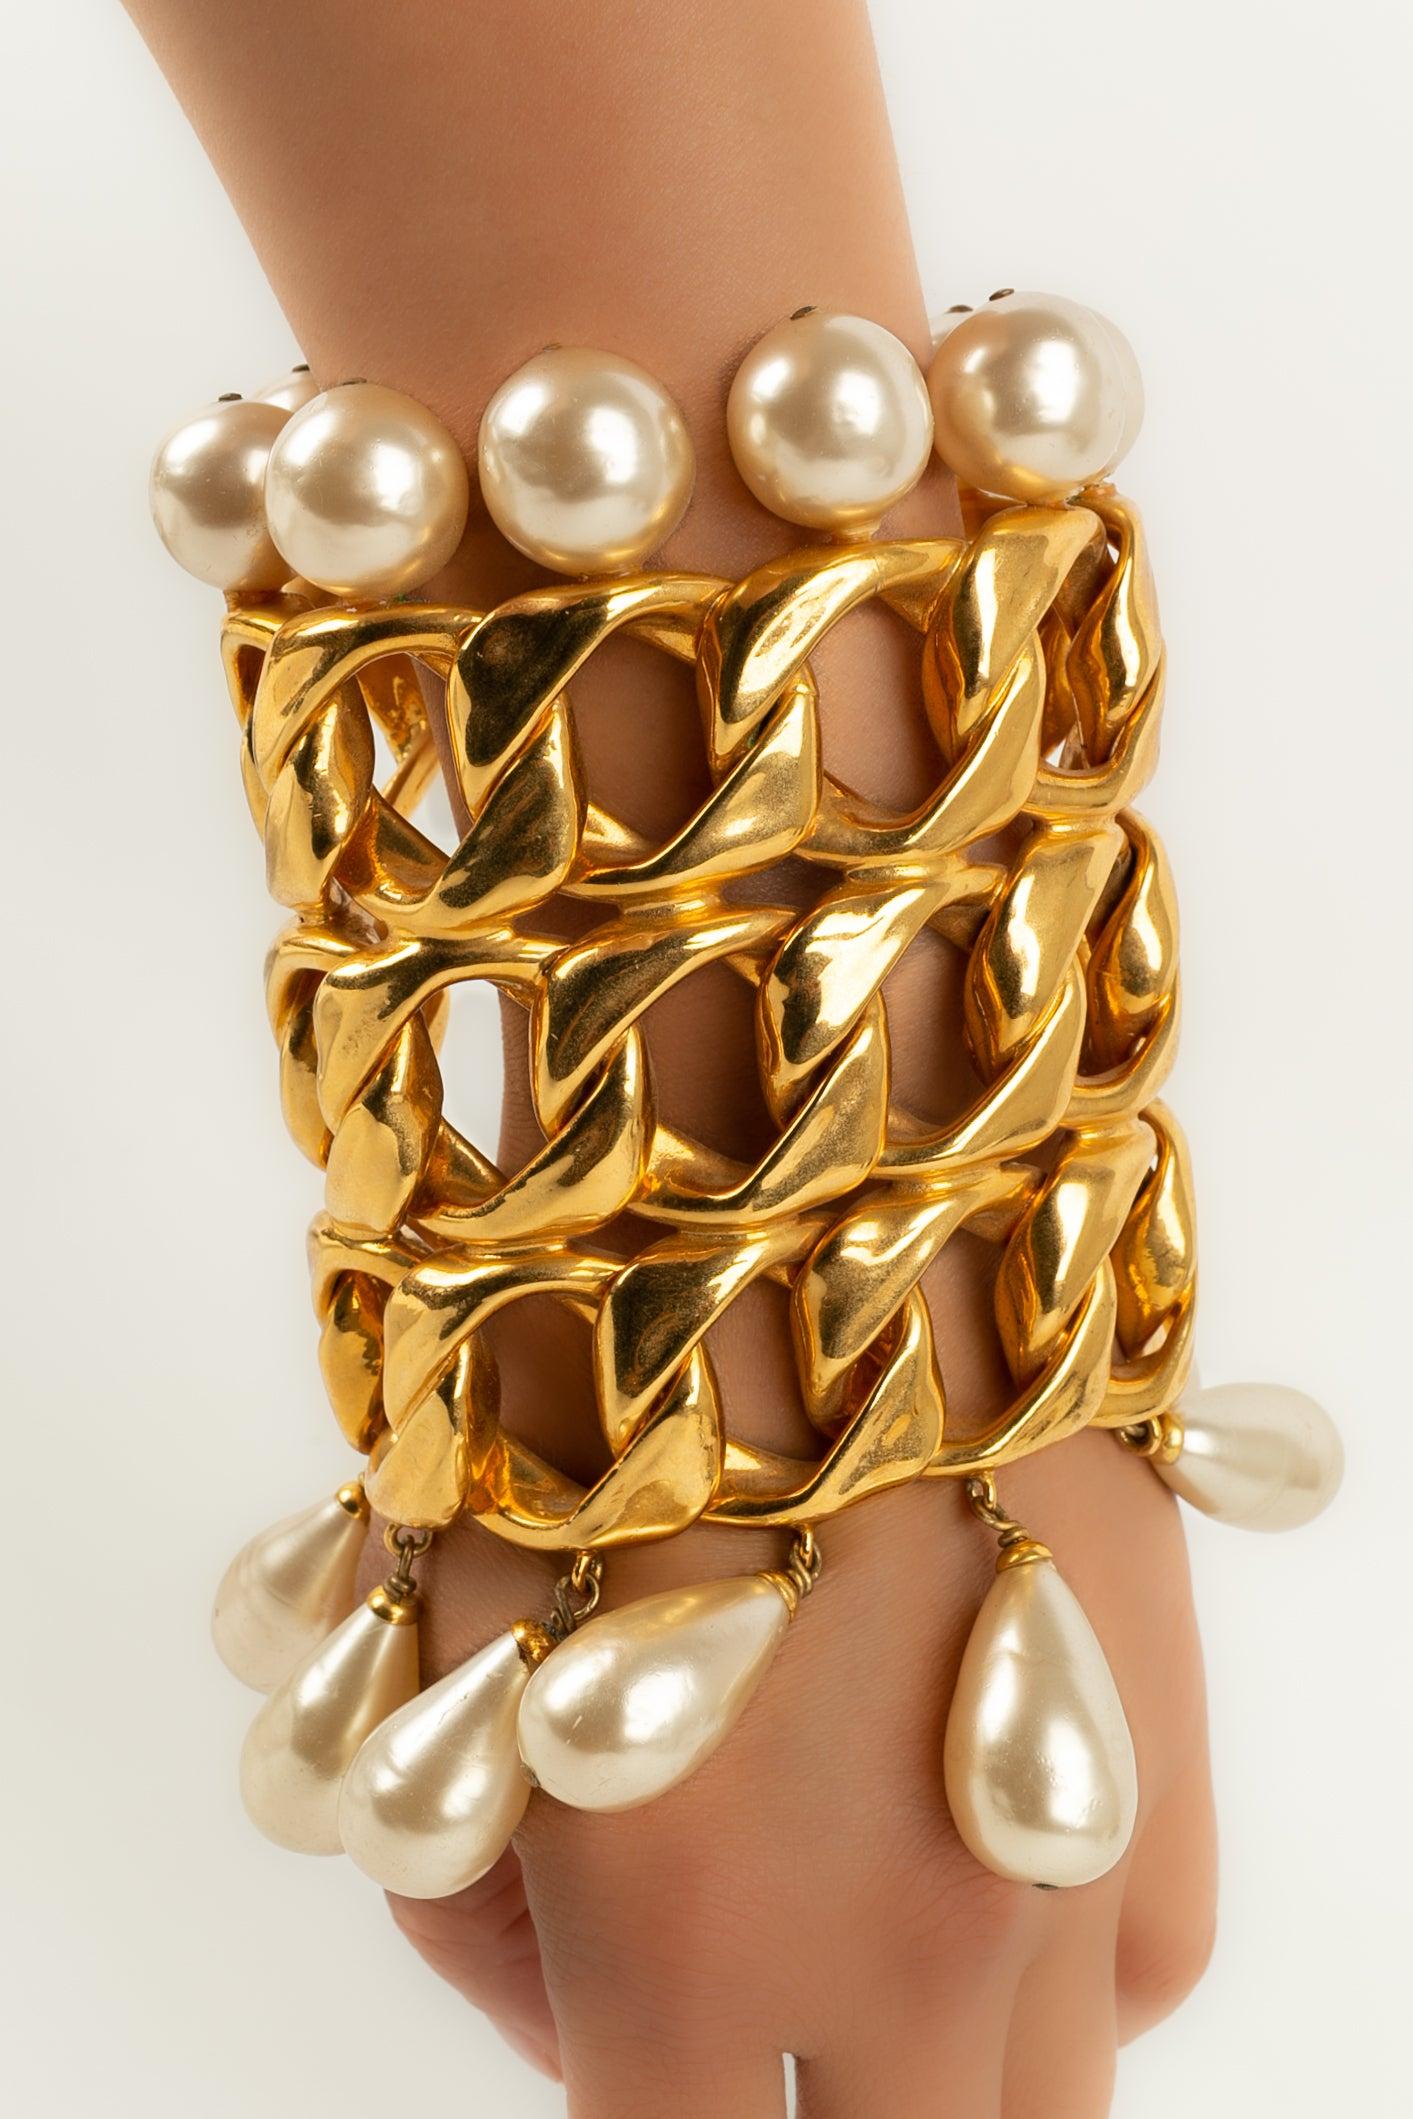 Chanel Cuff Bracelet in Golden Metal, Costume Pearls, and Pearly Drops For Sale 4